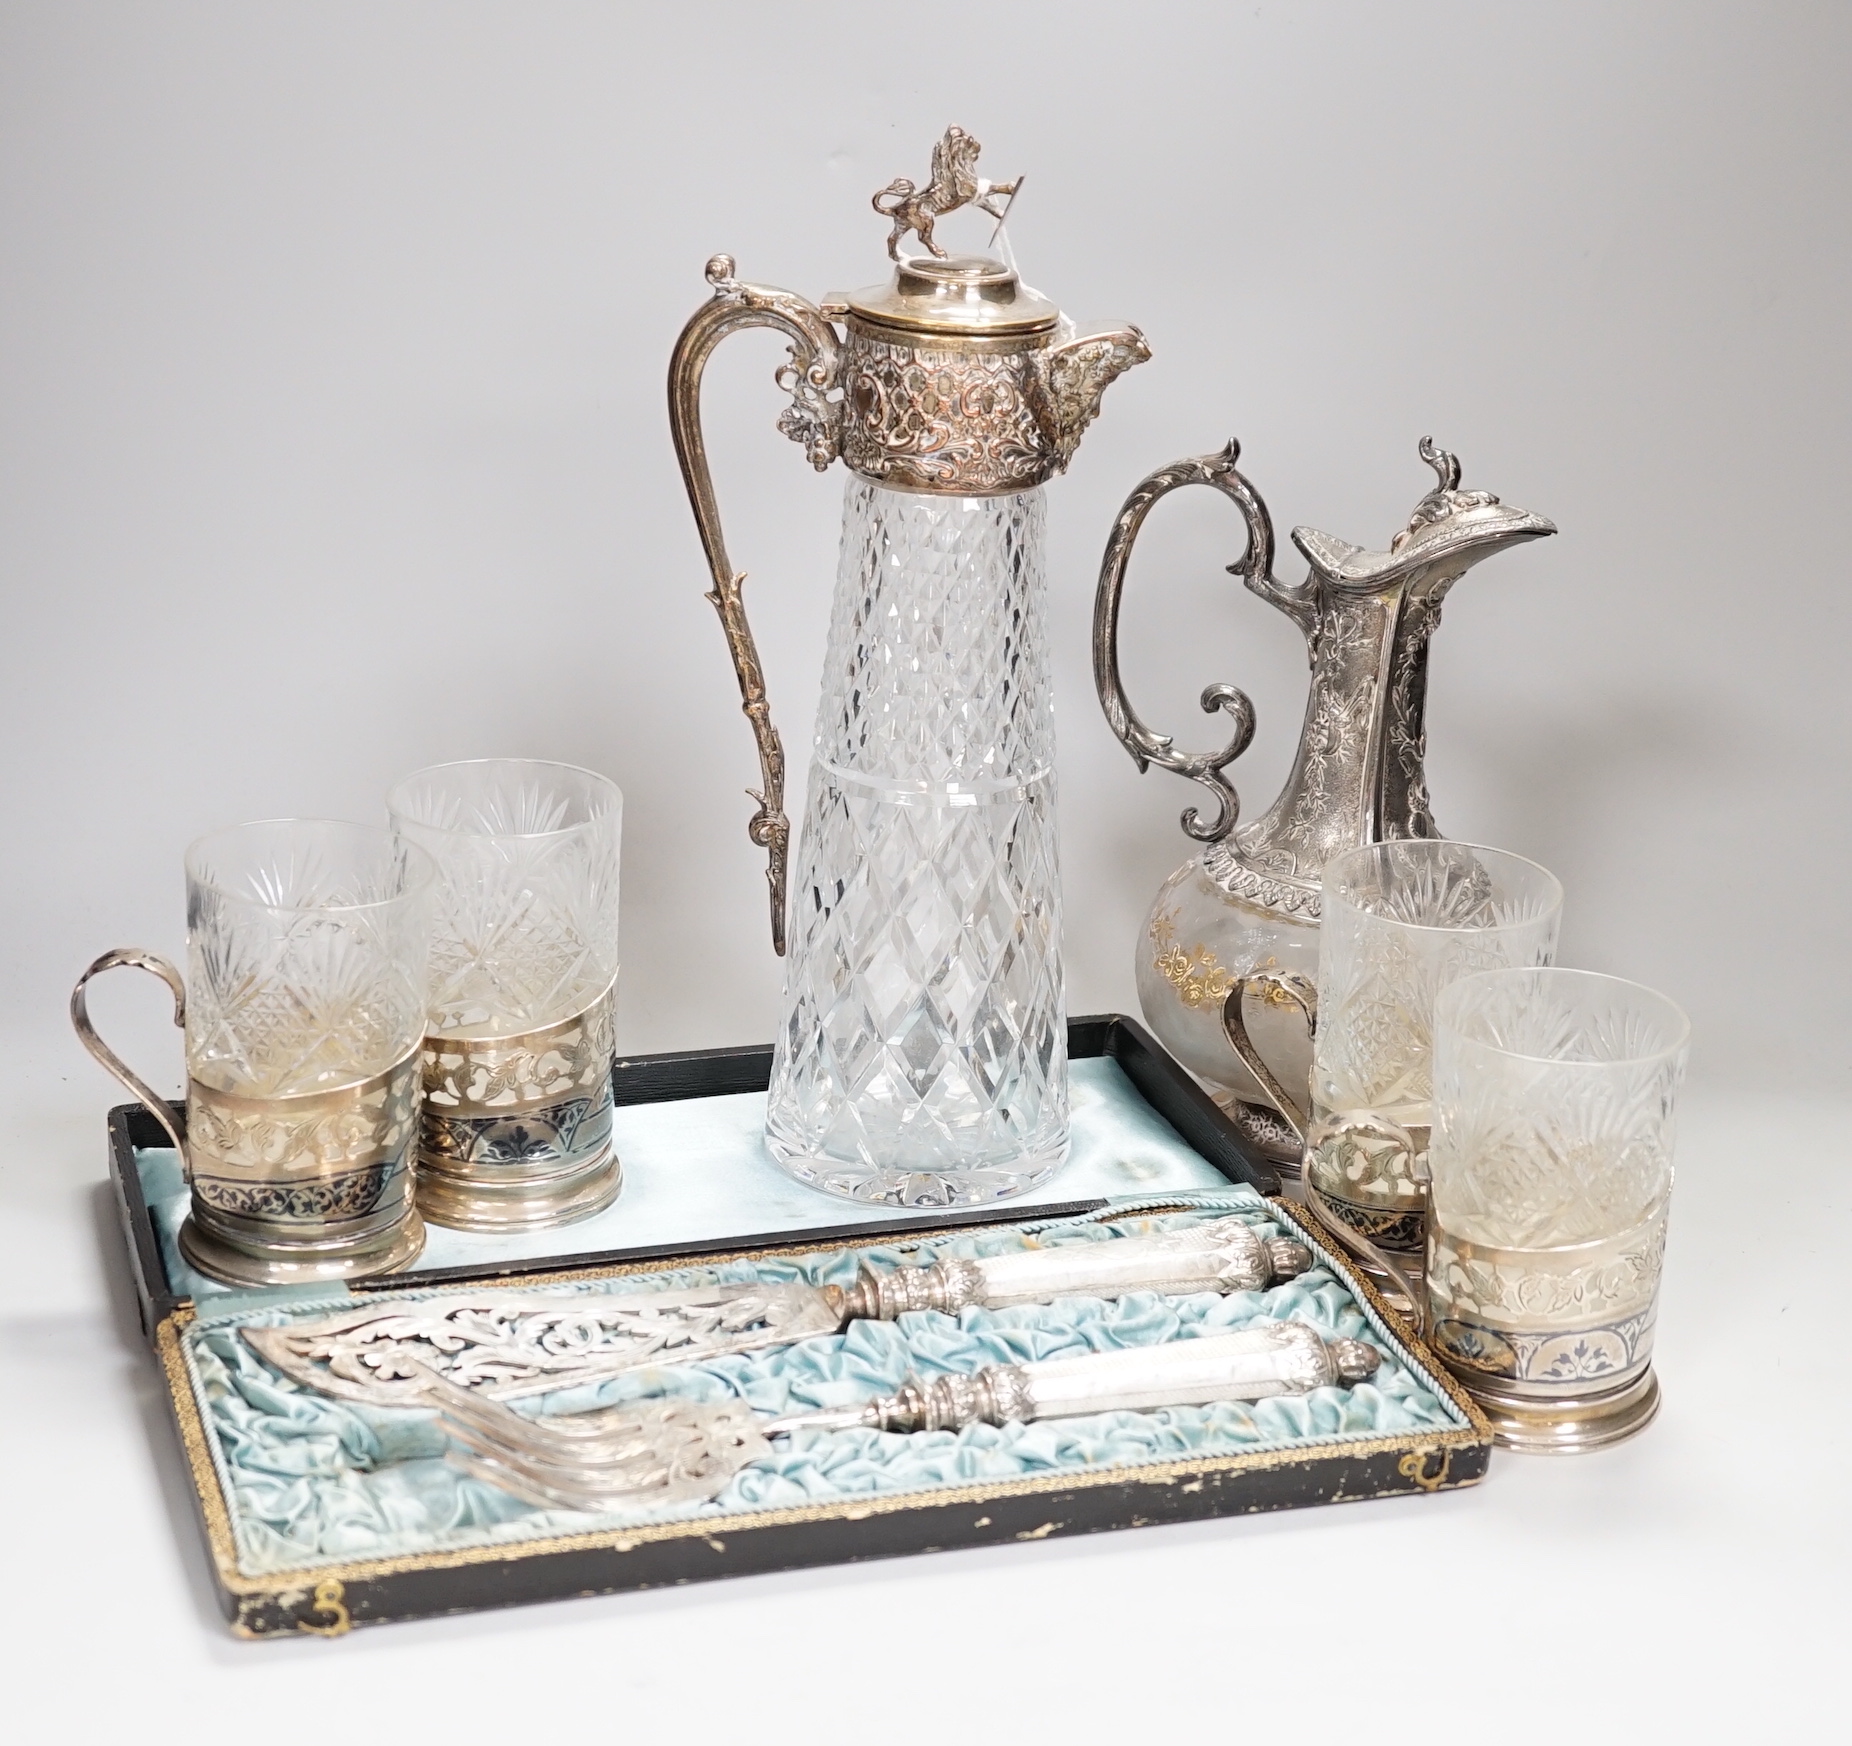 Two claret jugs, one with gilt decoration, four silver plated cup holders with glass liners and silver plated fish servers, the largest 32cm high